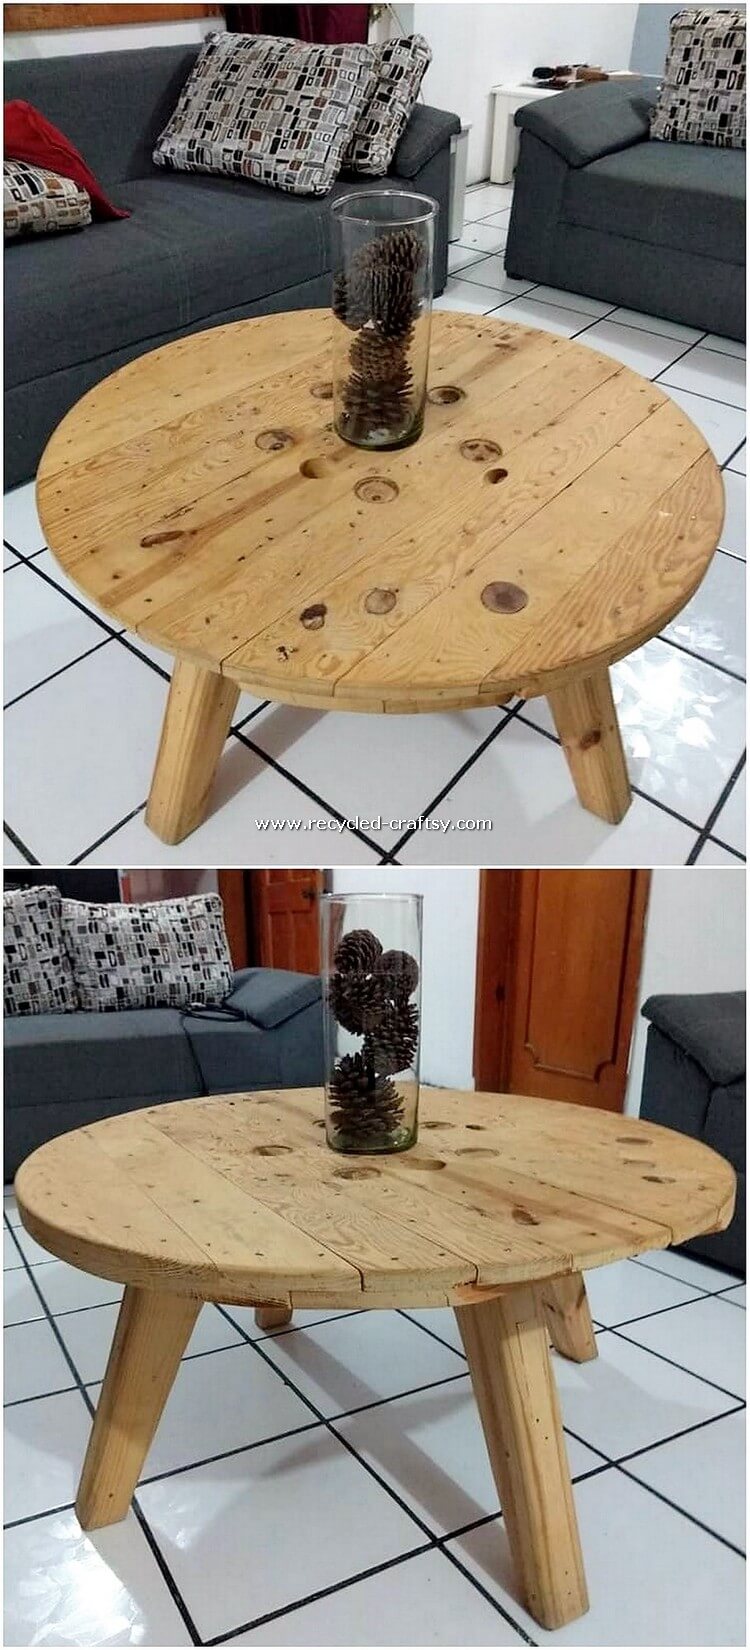 Wood Pallet Round Top Table